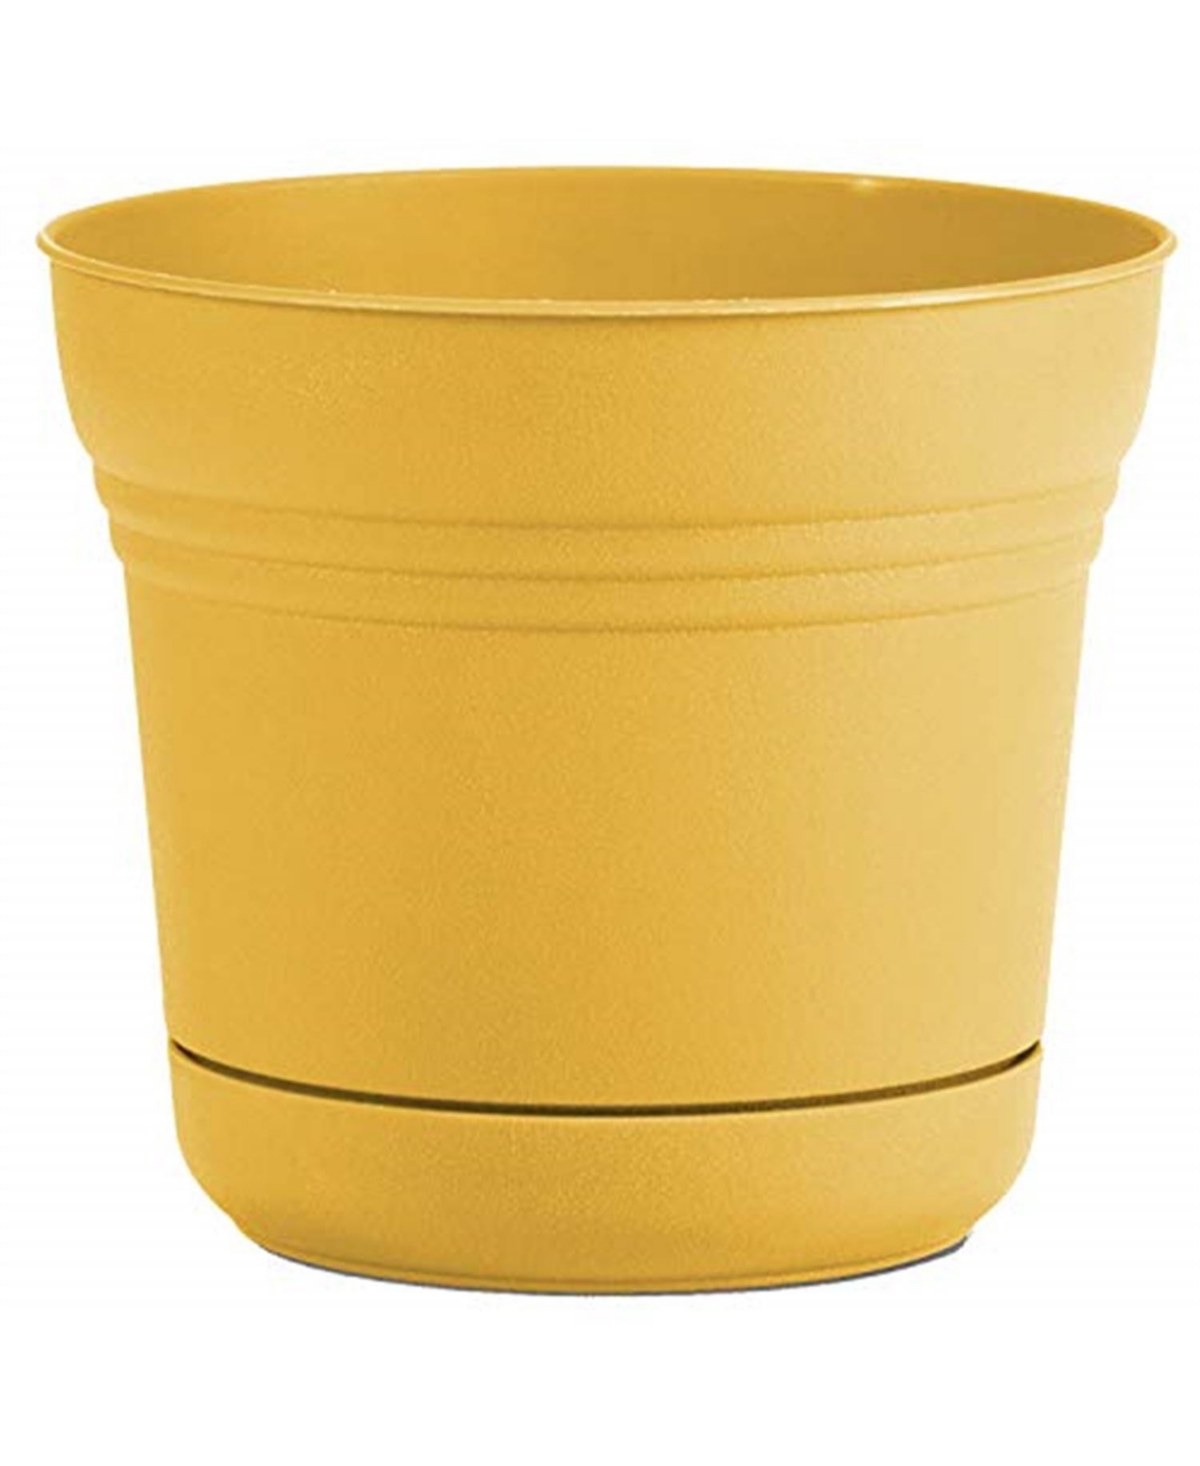 SP1423 Saturn Planter w/ Saucer 14" Earthy Yellow - Yellow